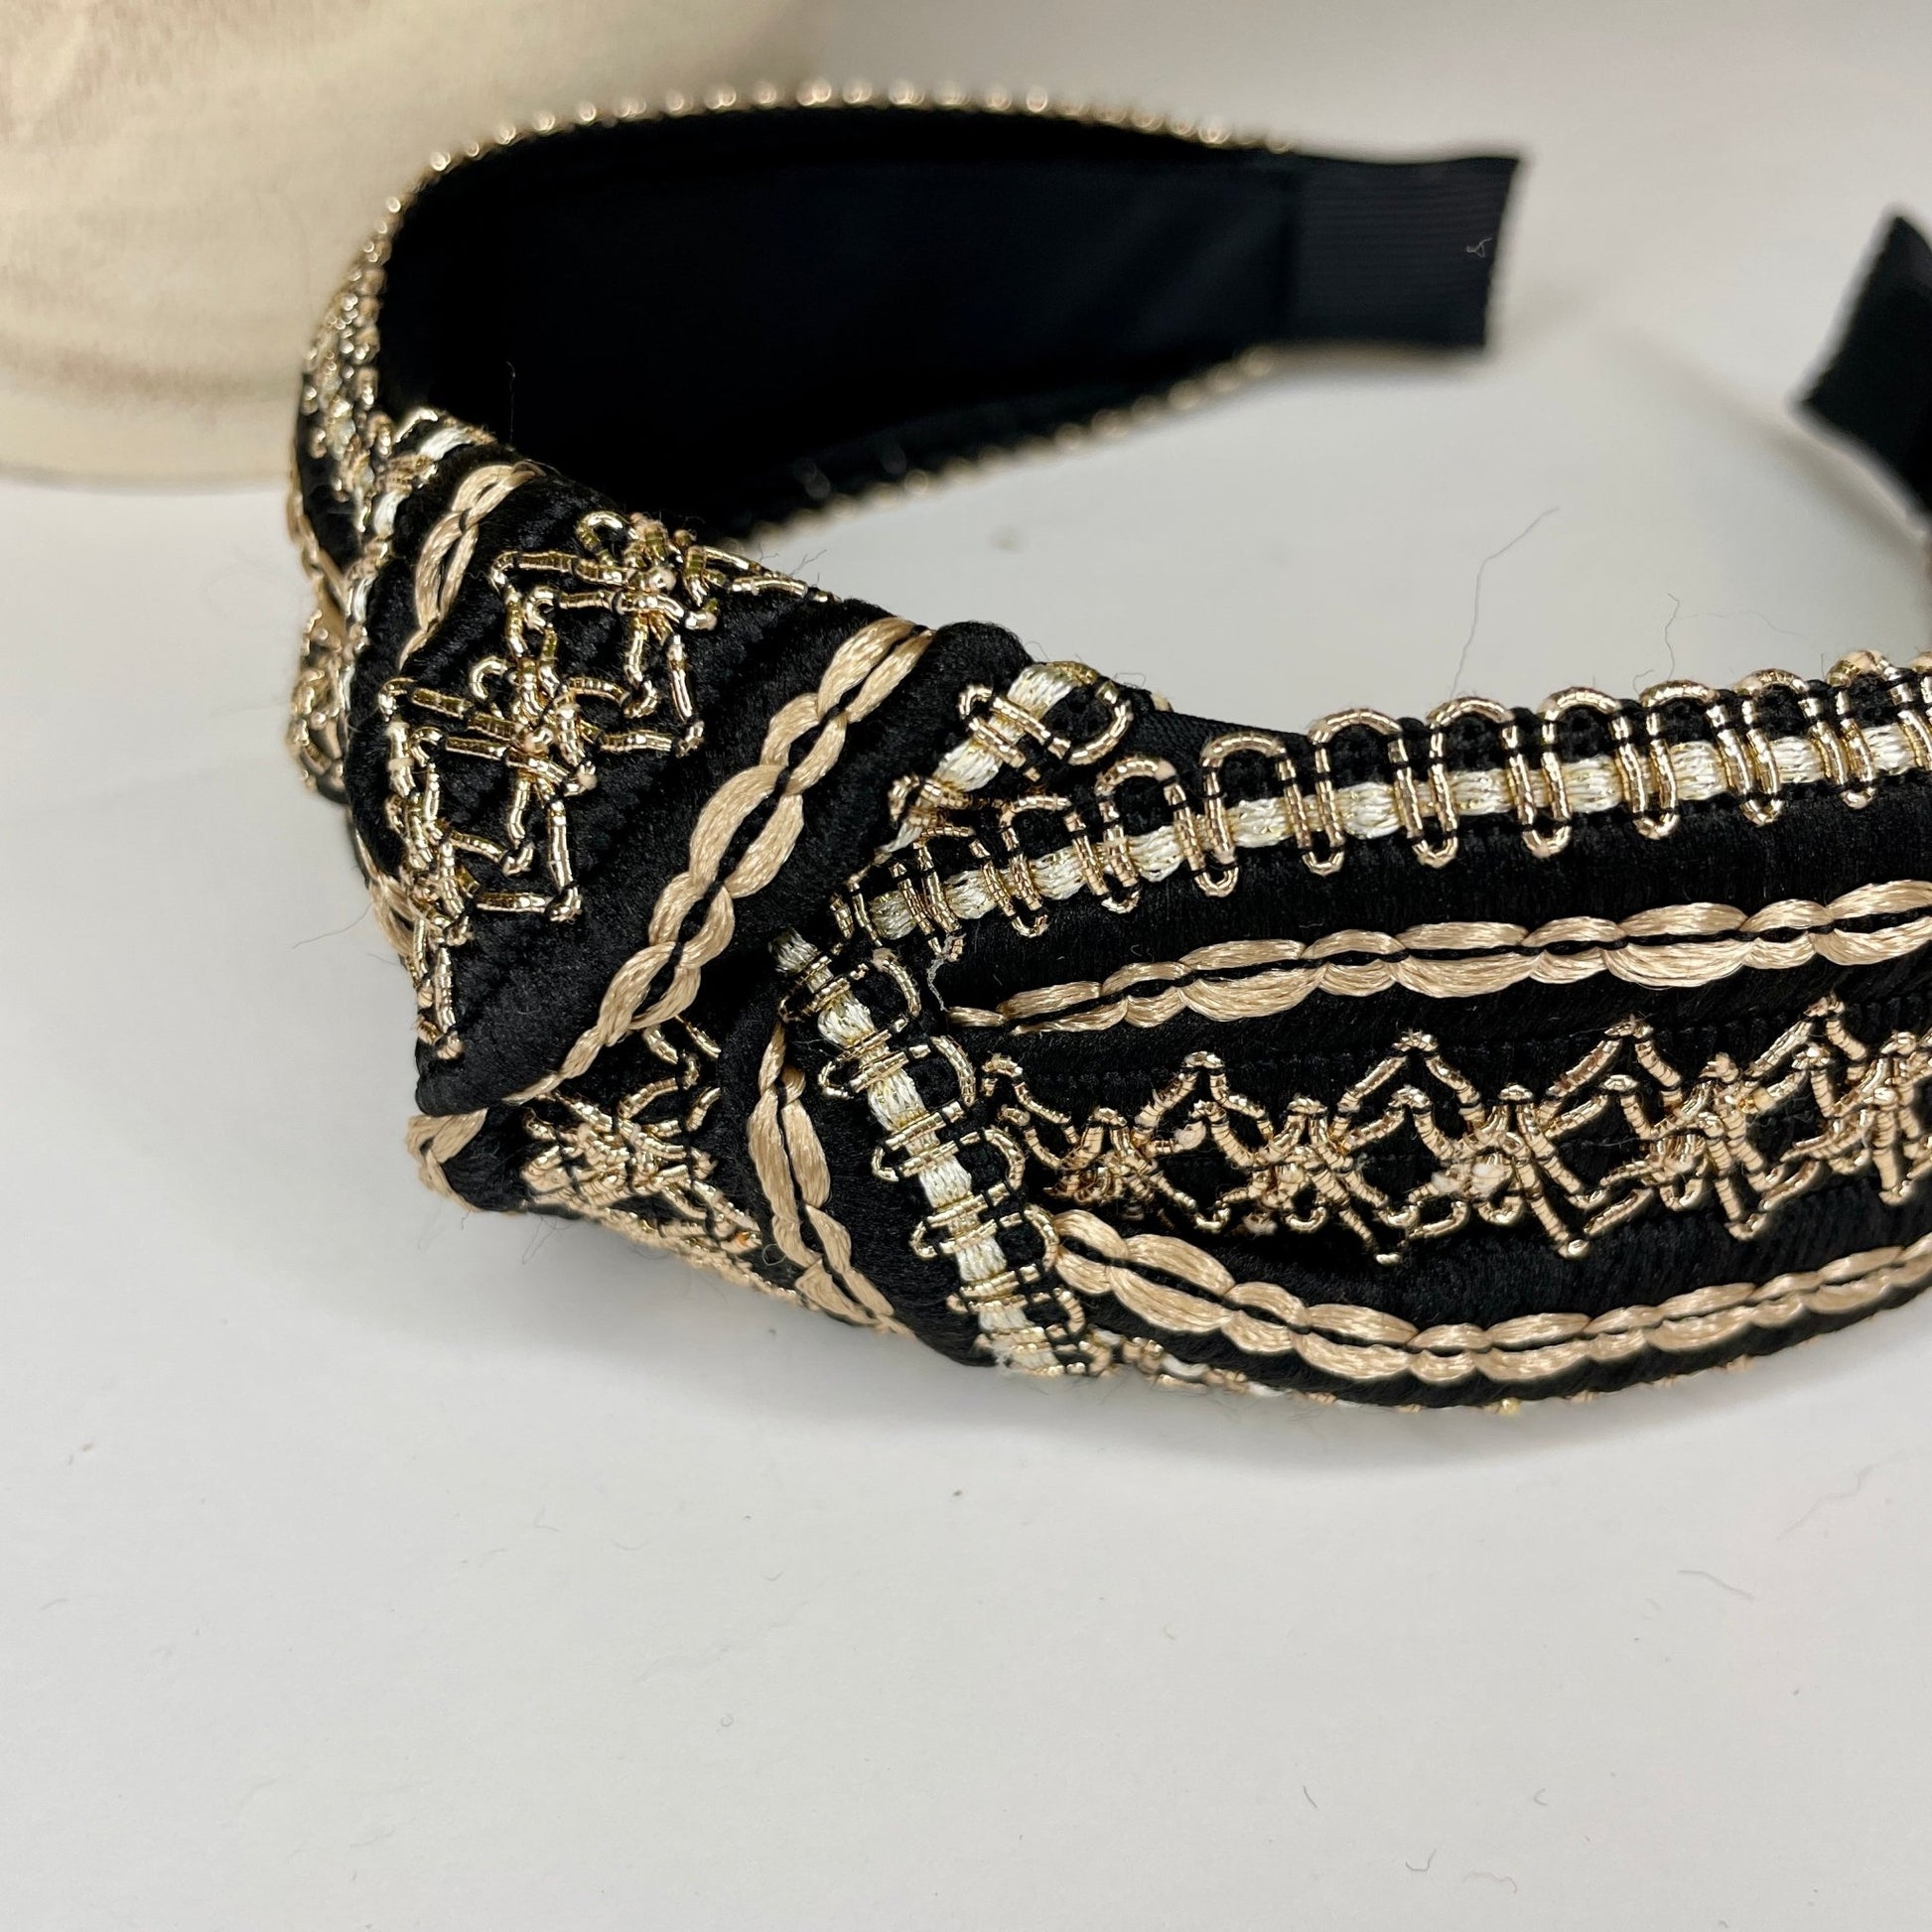 Black with Gold Delicately Stitched Knot Headband - Gray Bird Label